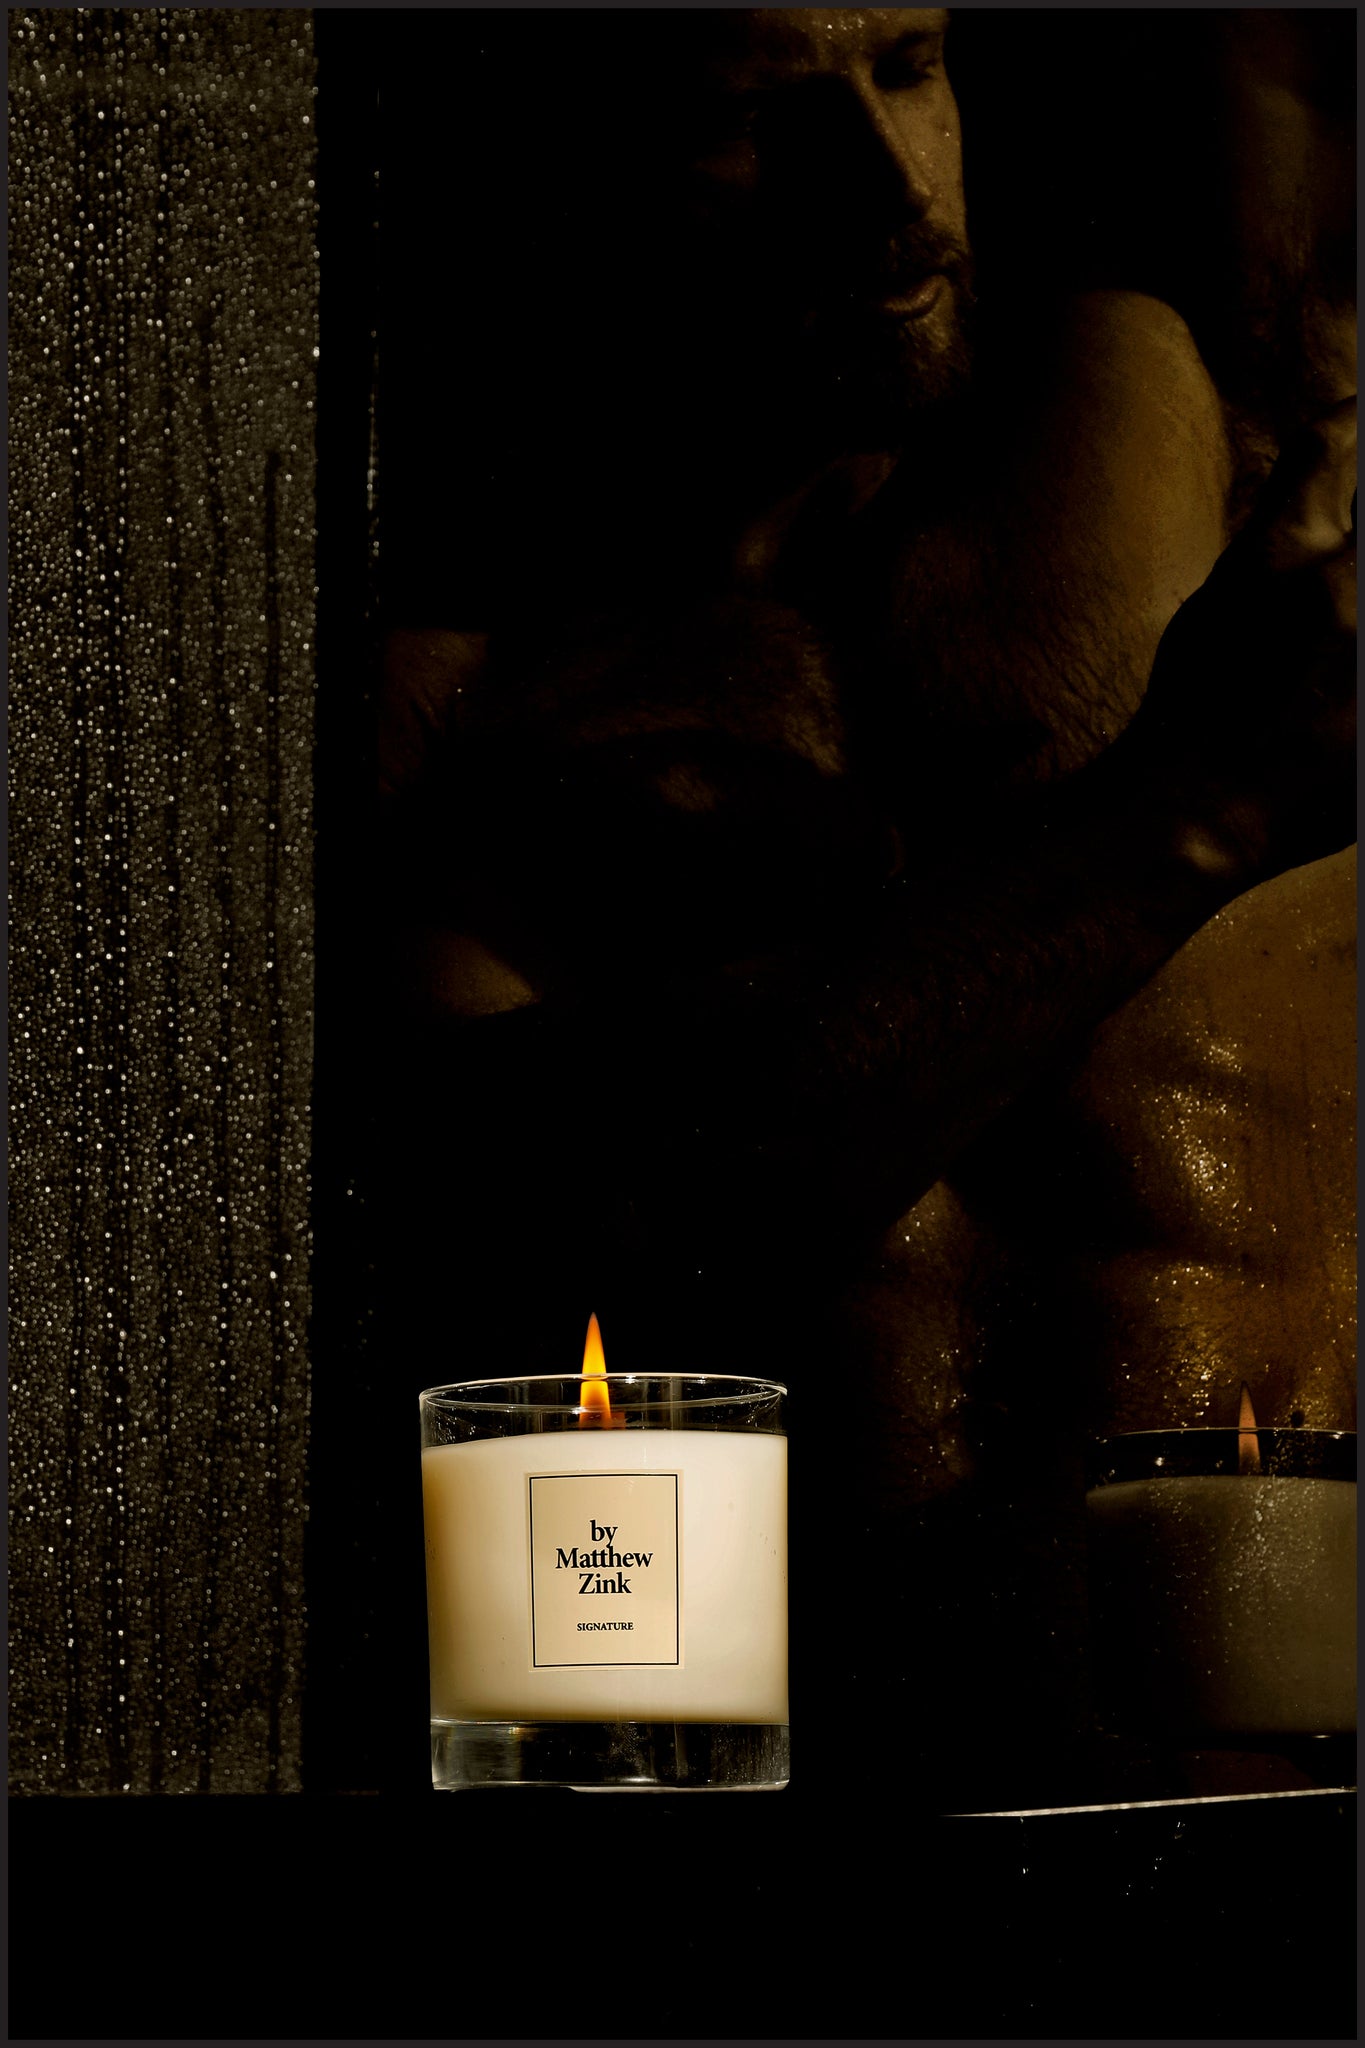 by Matthew Zink - Signature Candle